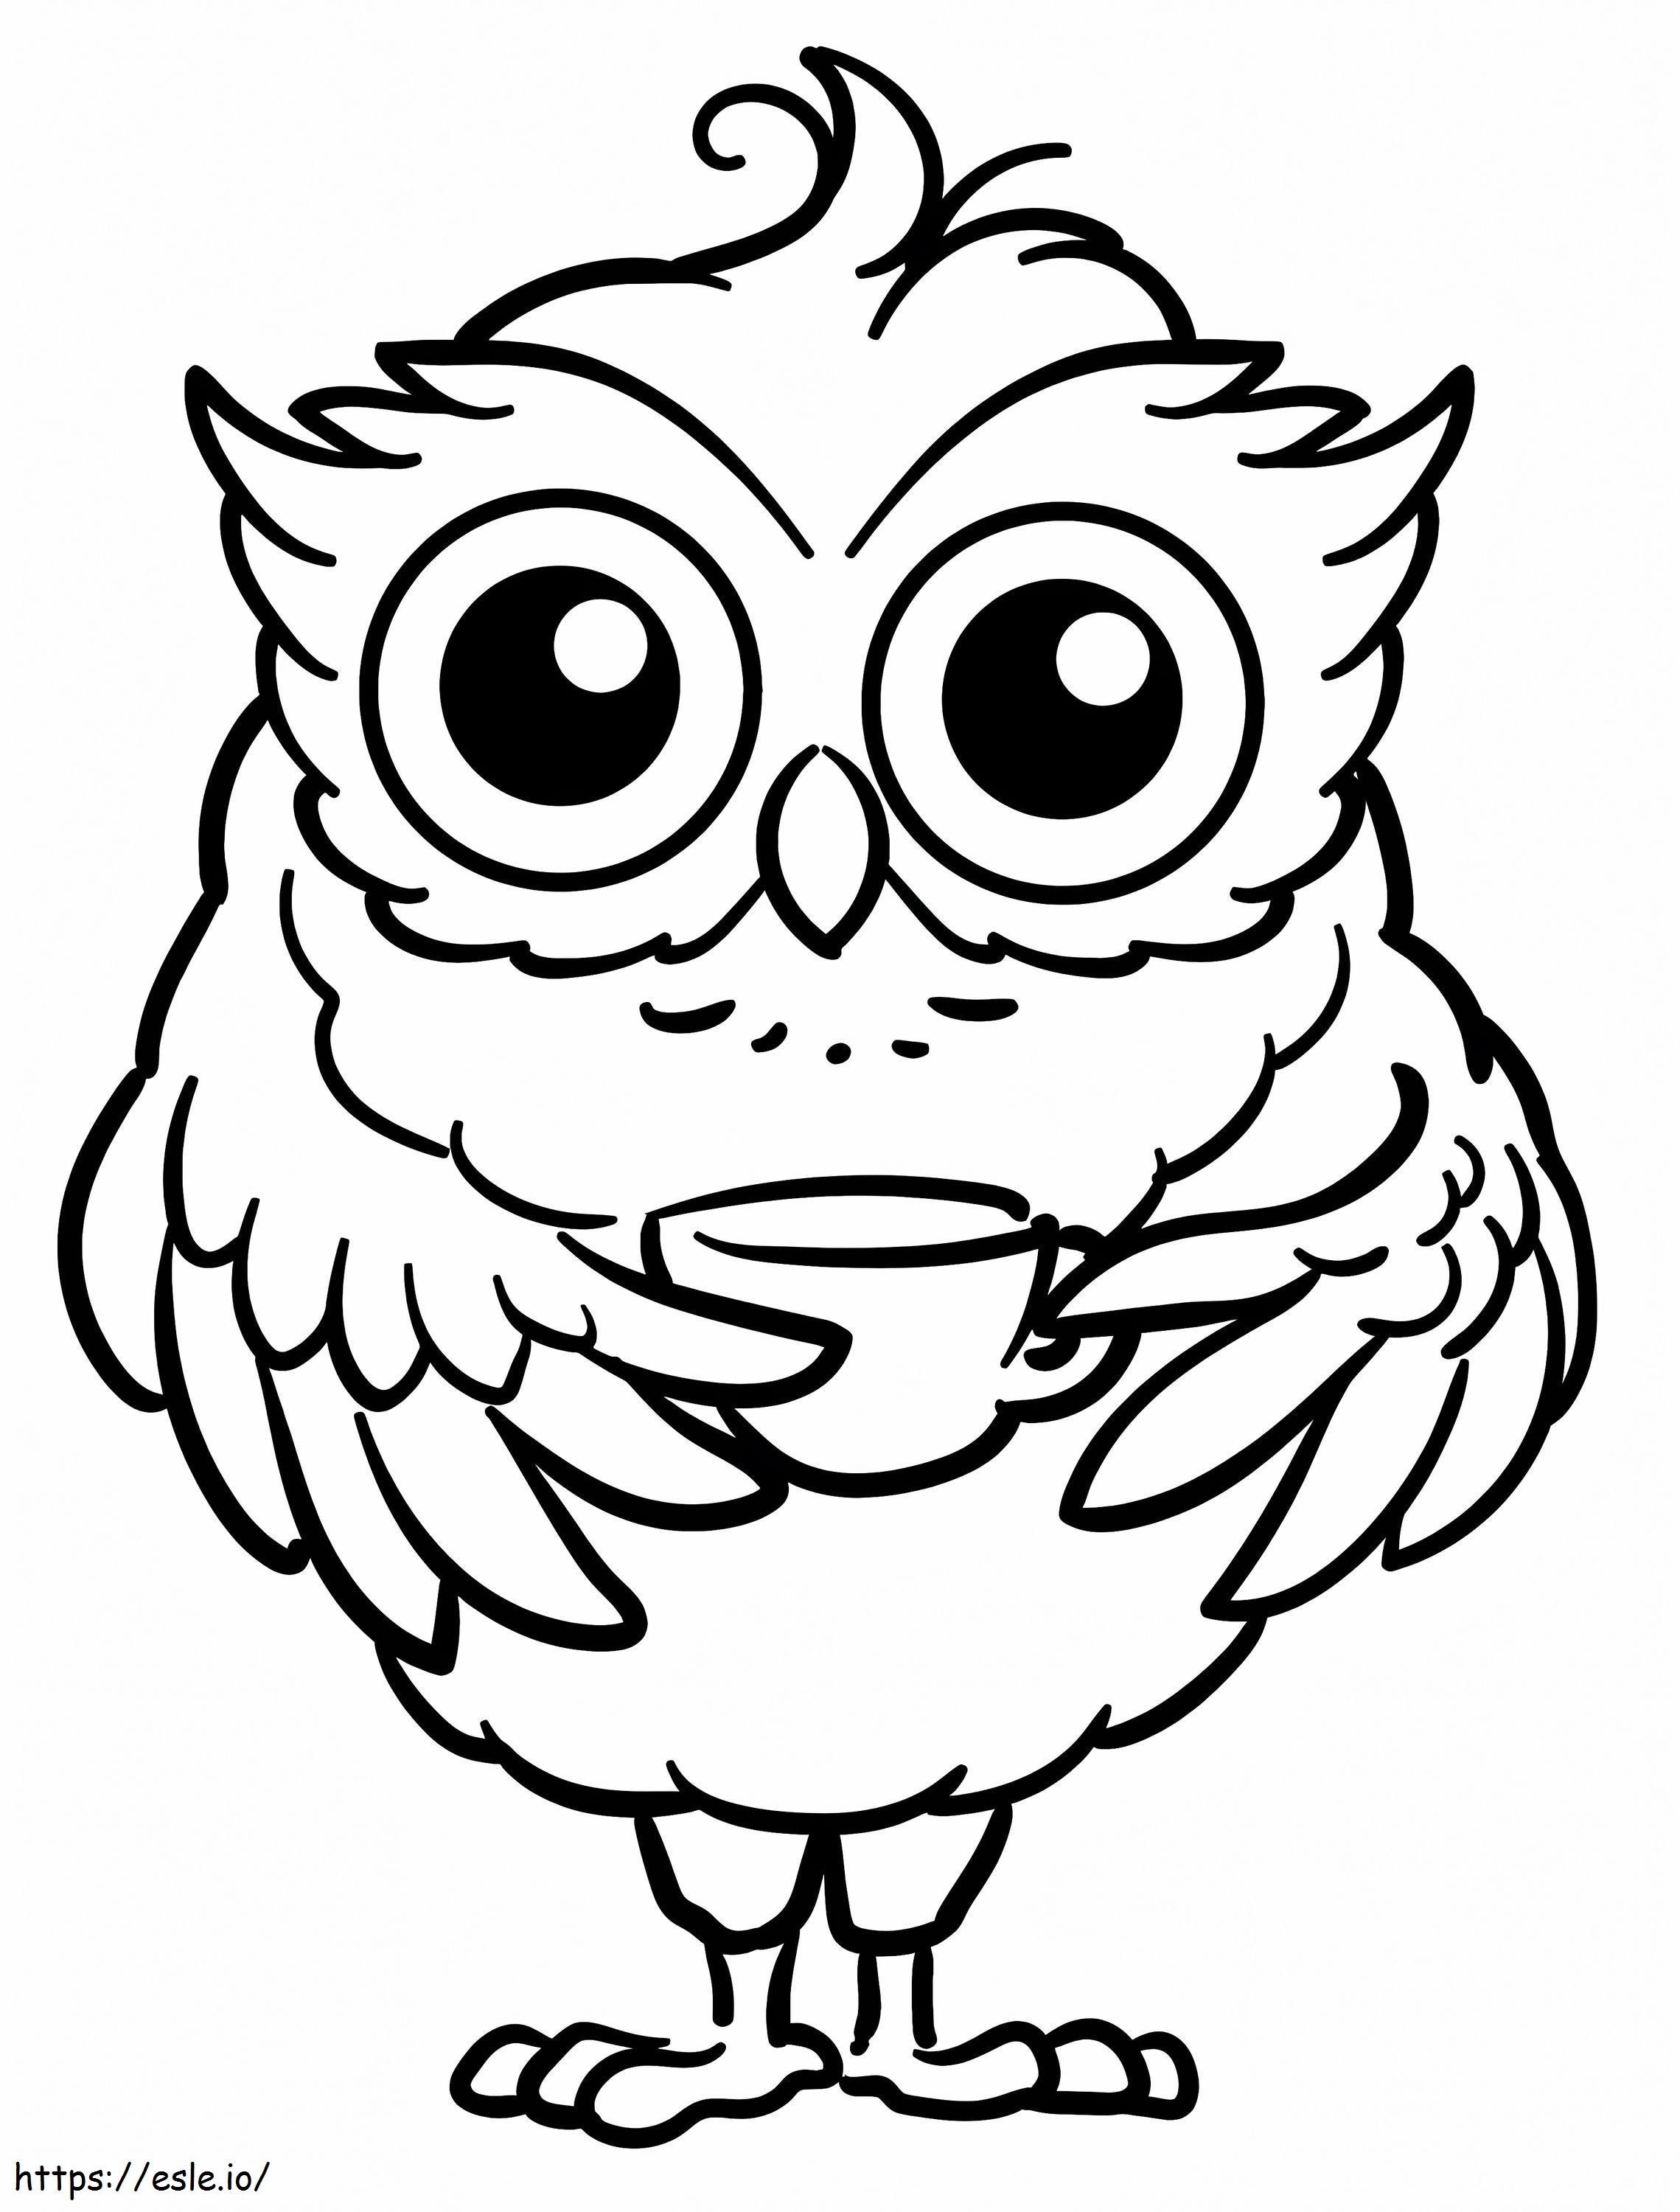 Owl With Tea Cup coloring page